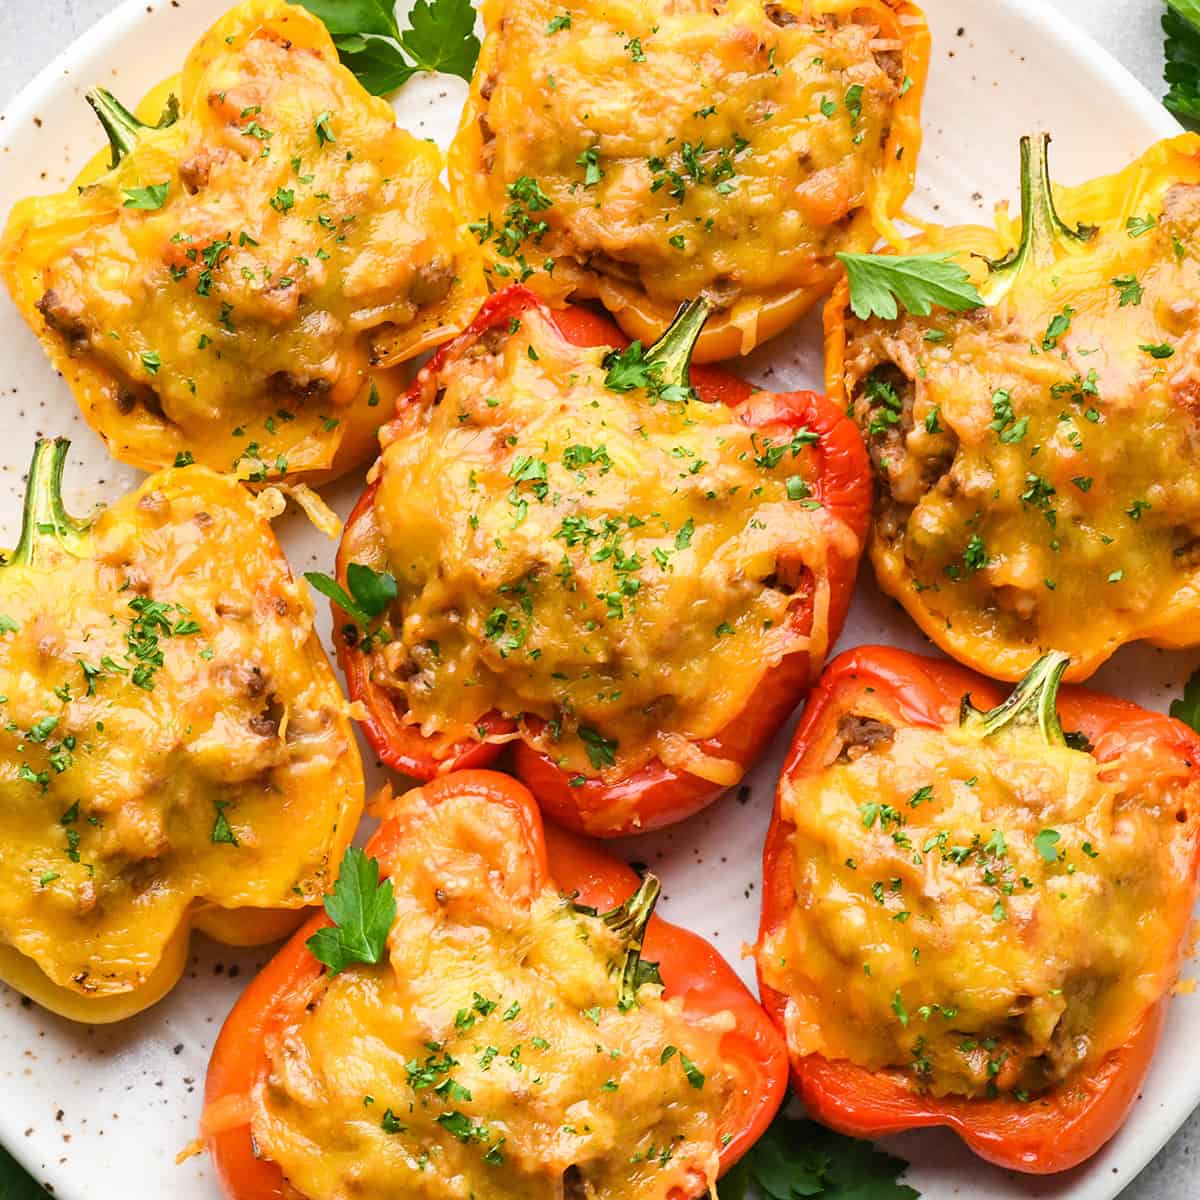 7 stuffed peppers on a plate